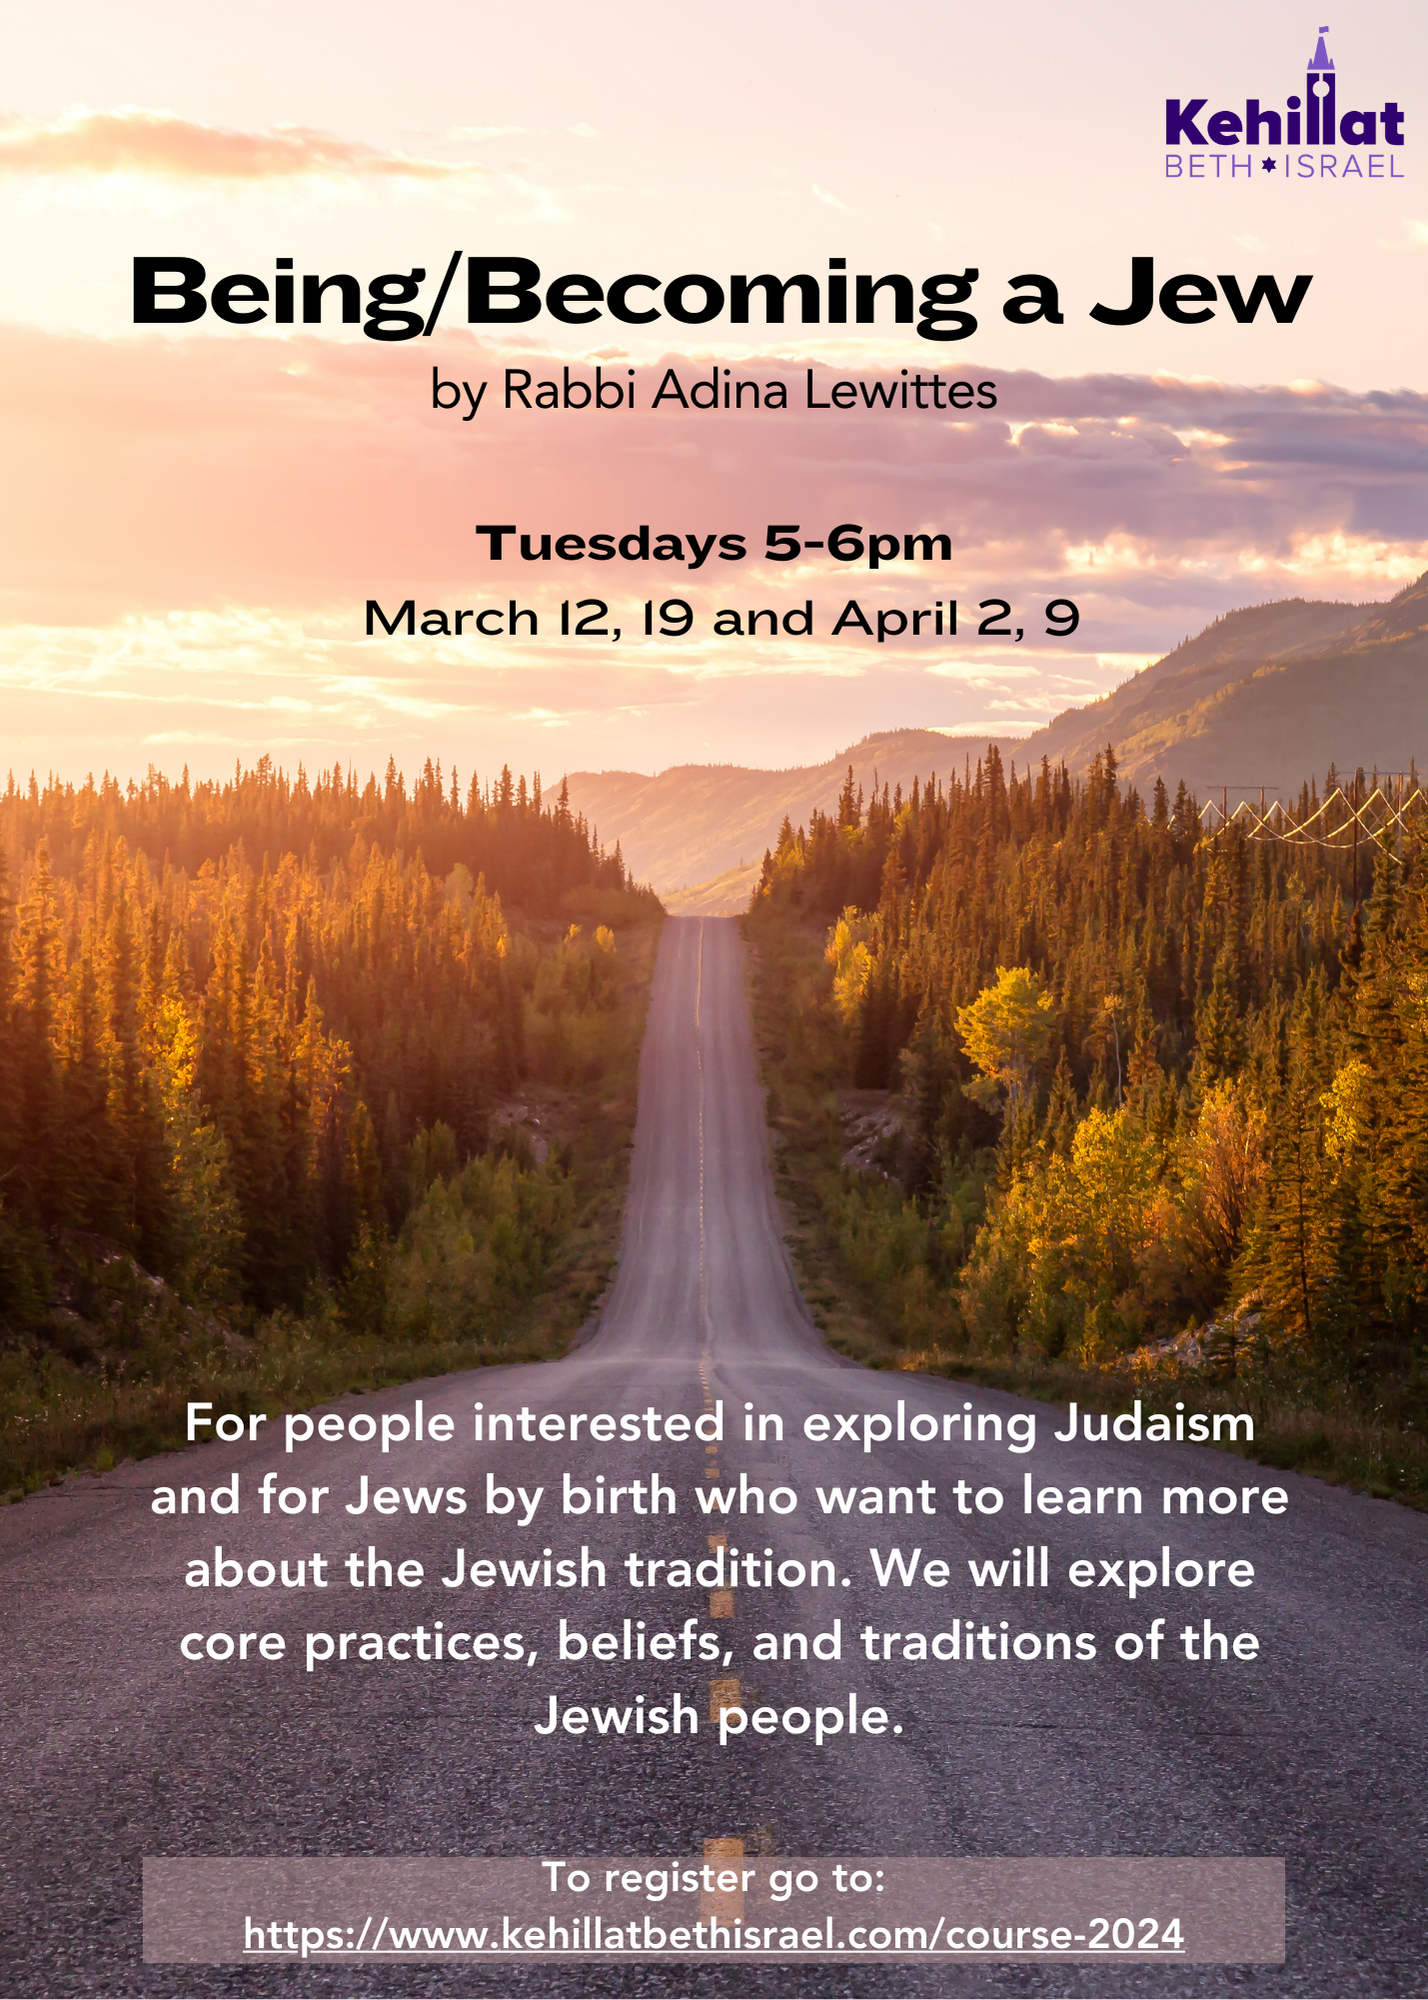 Being/Becoming a Jew by Rabbi Adina Lewittes